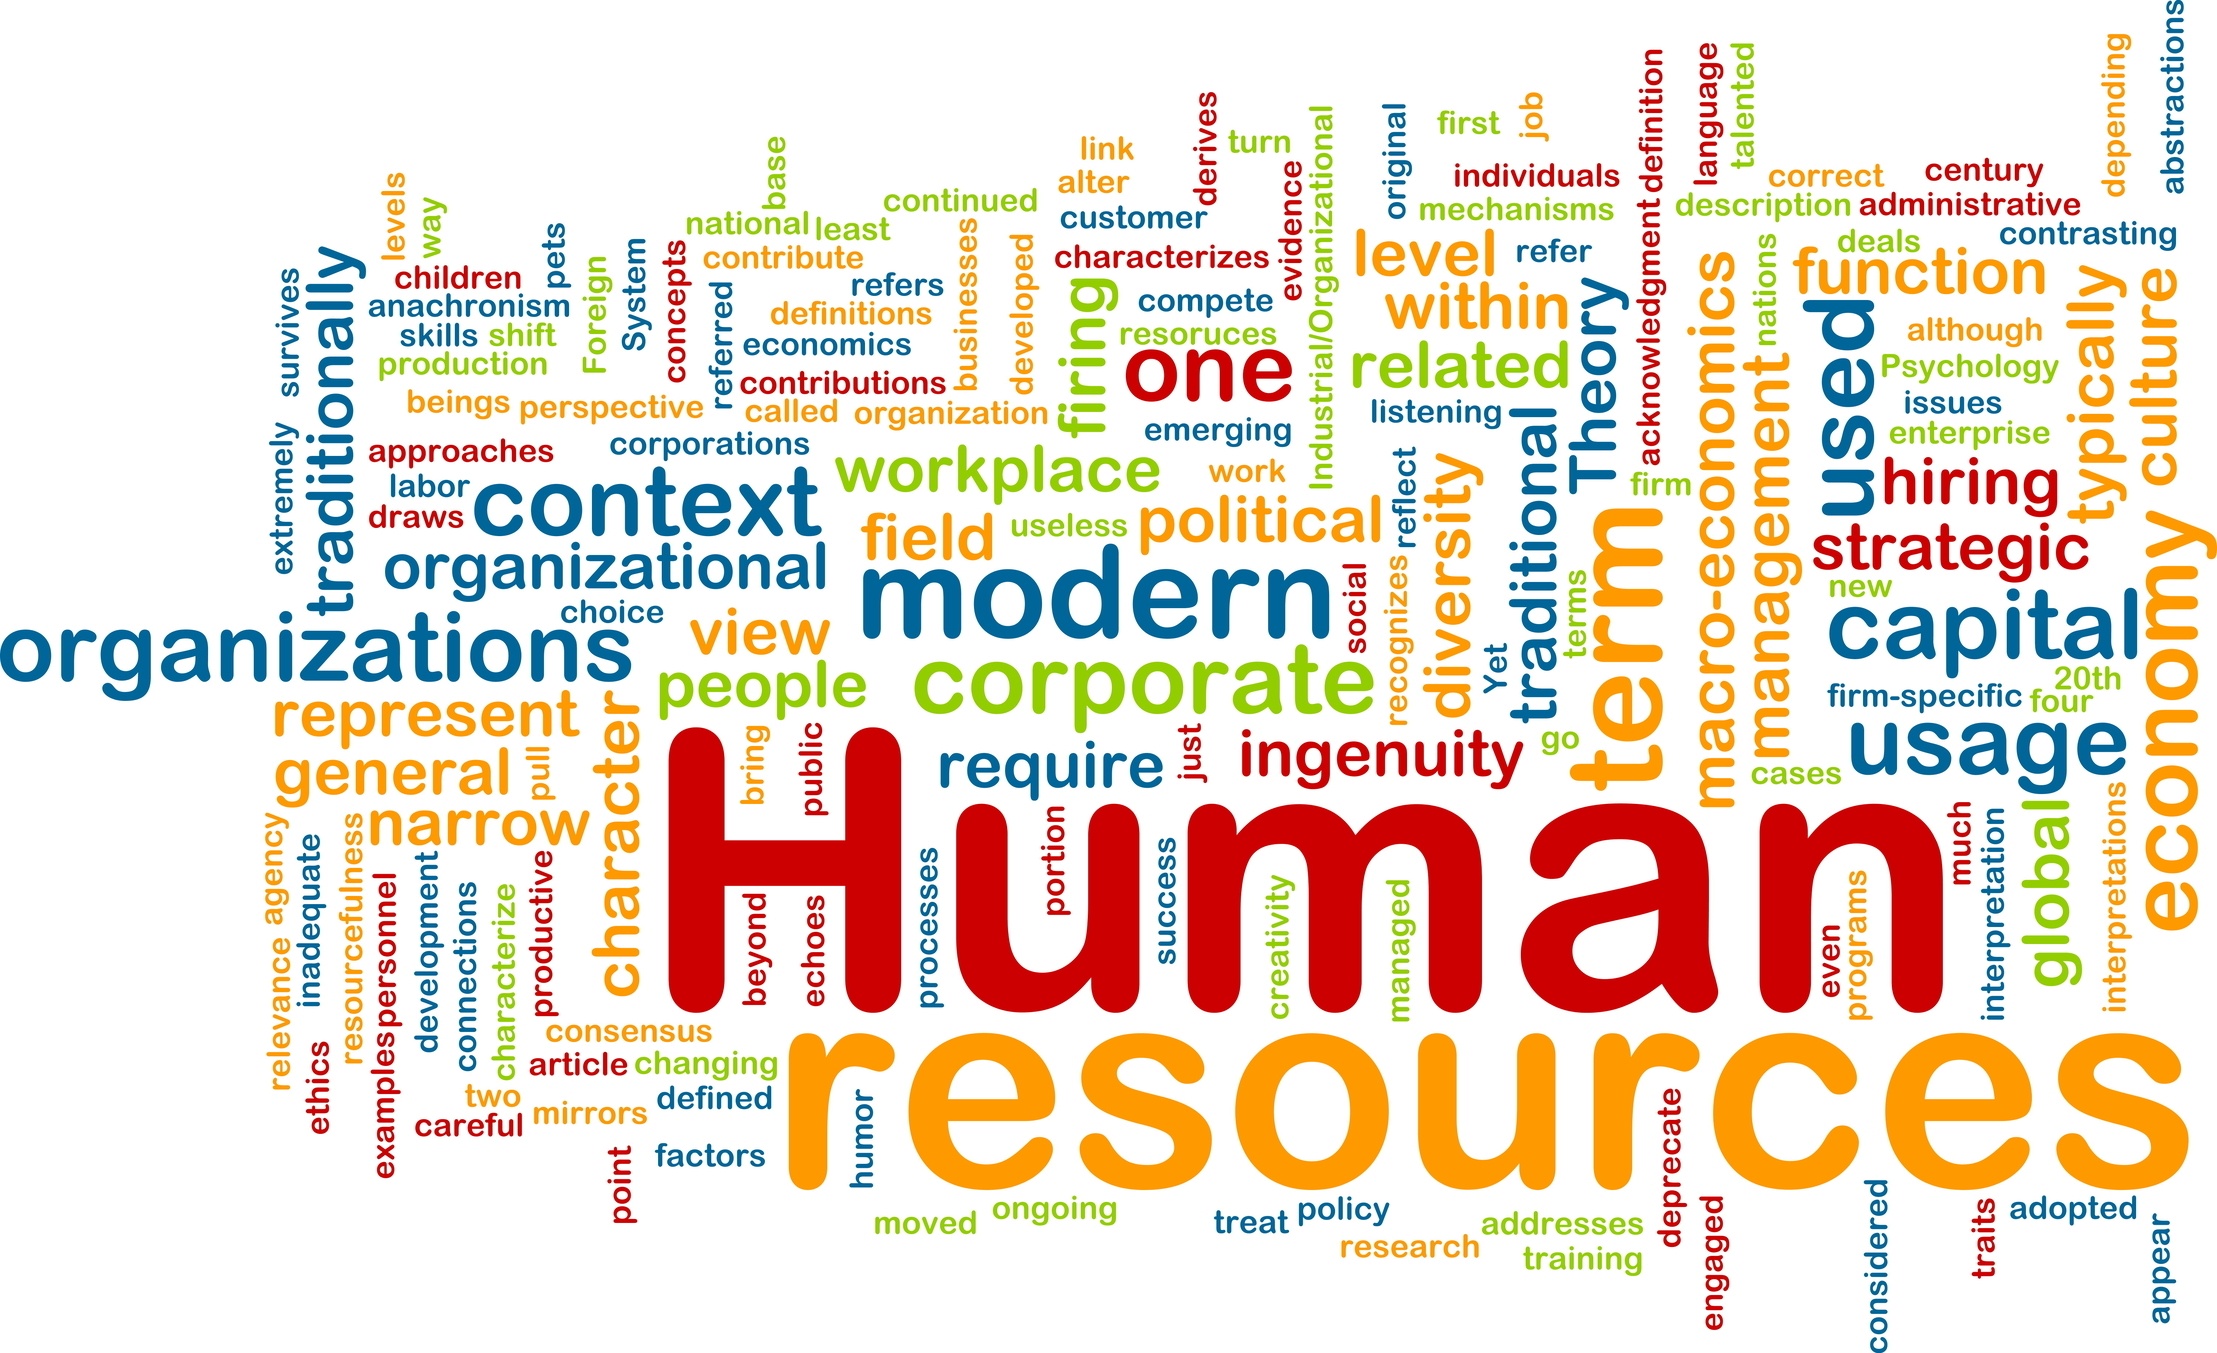 Human resources management and labour relations training